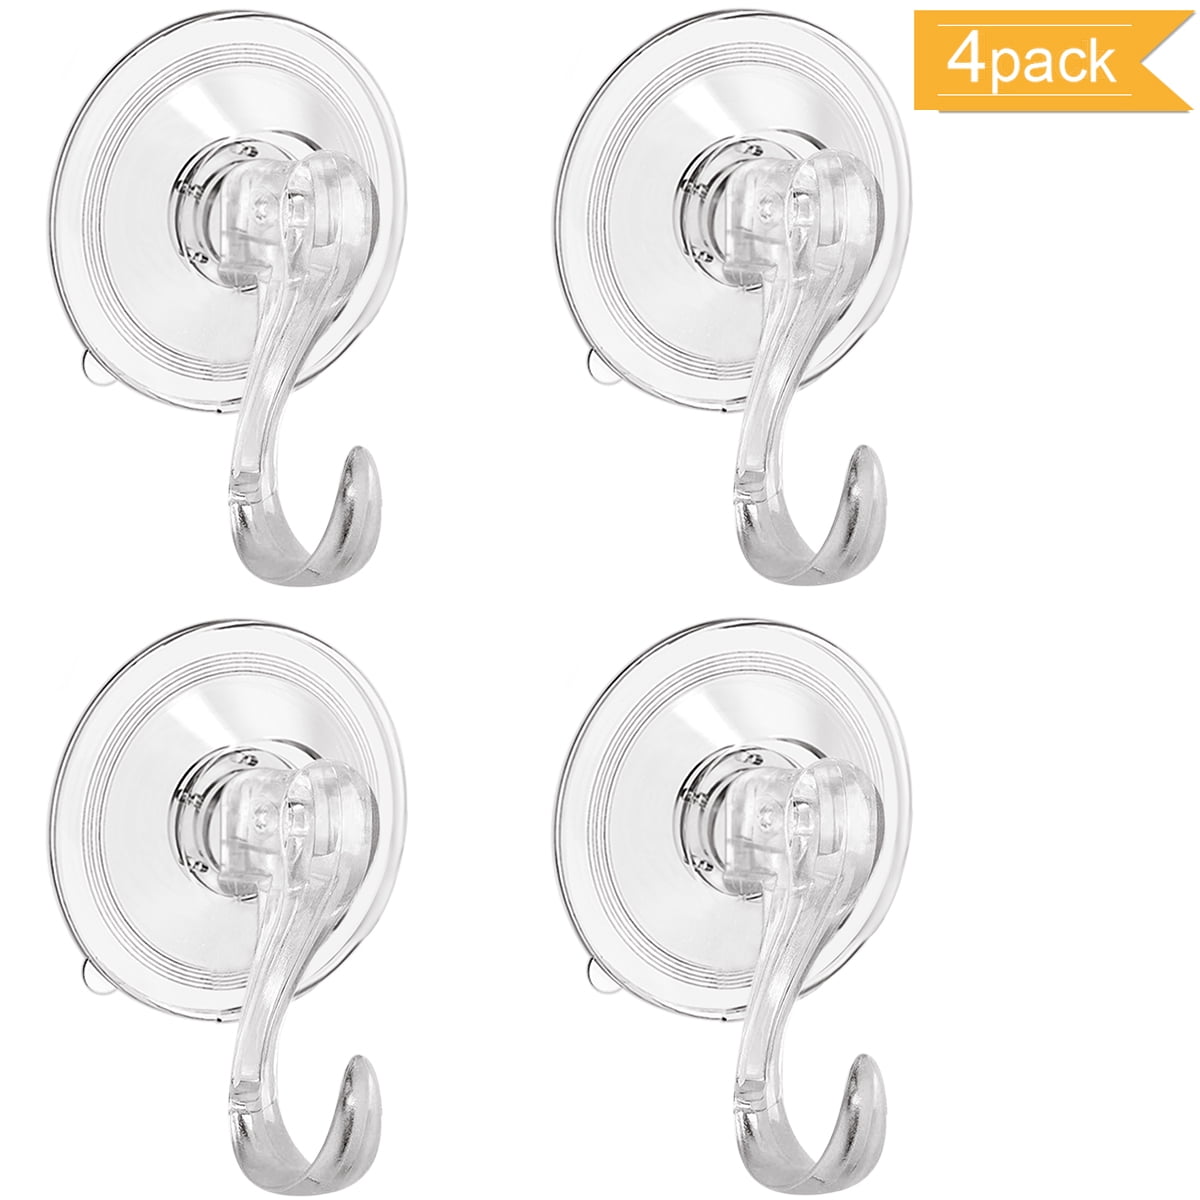 3 Large Giant  Suction Cups Holds Up To 10 Pounds Heavy Duty Plastic 